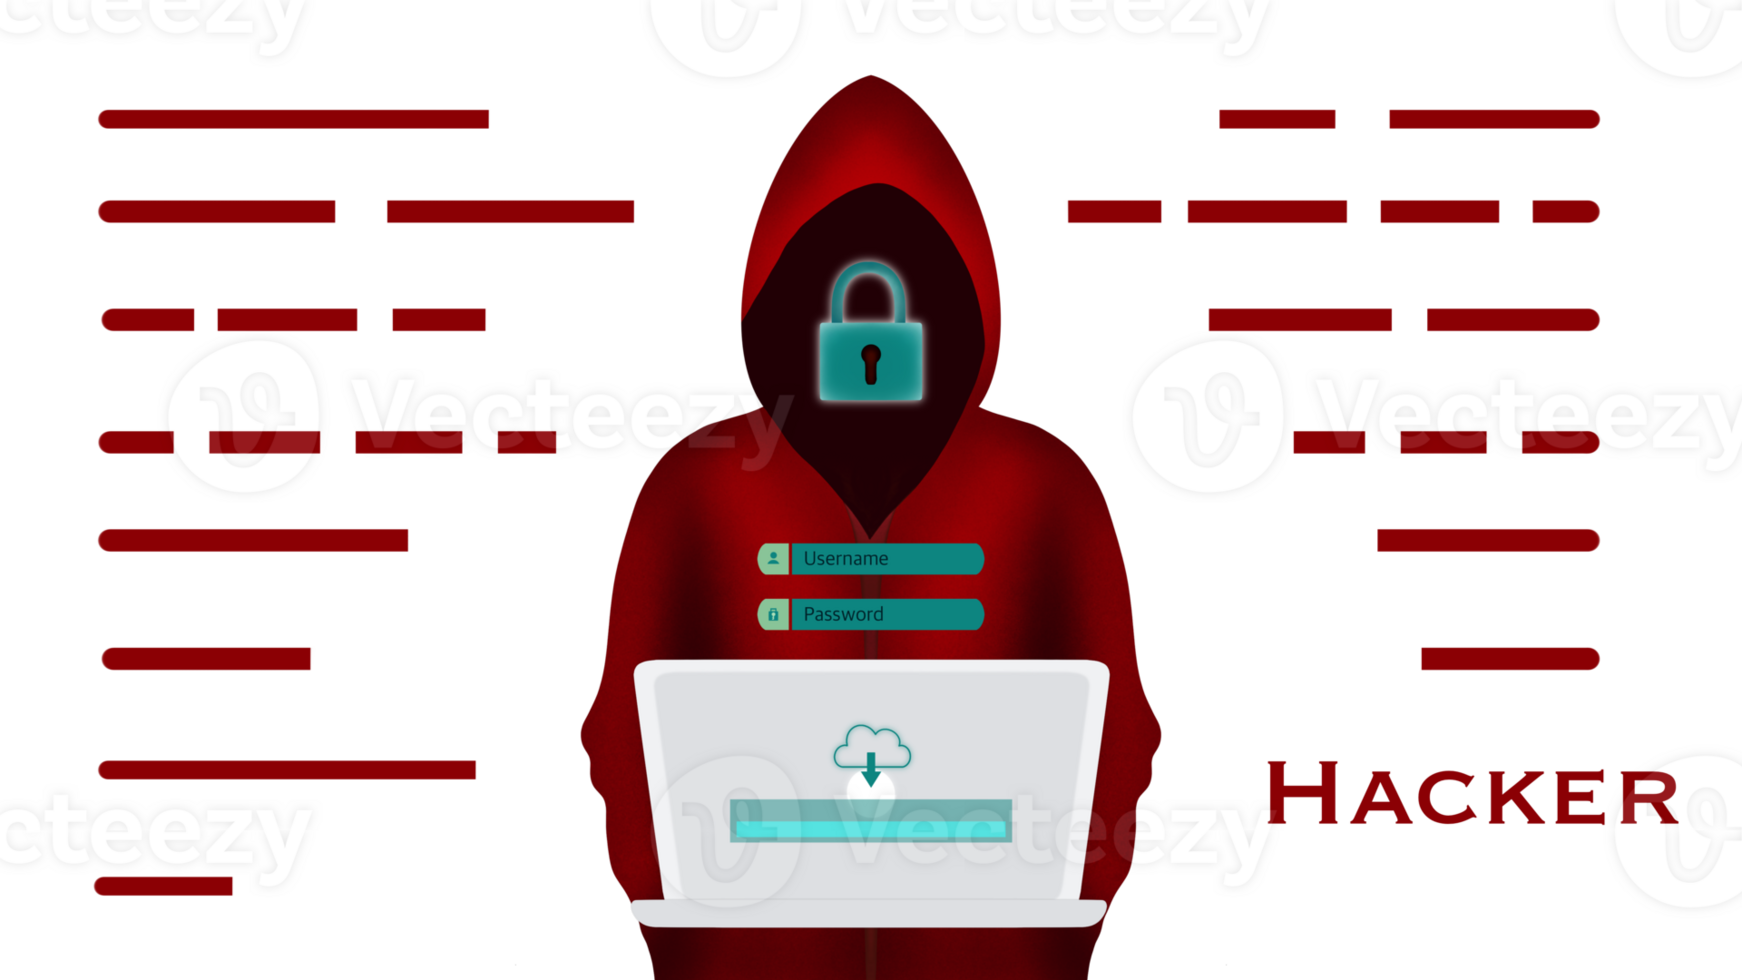 faceless hacker in red shadows using laptops, hacker criminal security internet, Internet And Personal Data Hacker Attack Concept, Website Landing Page, Hacker at Computer Trying To Hack Security png